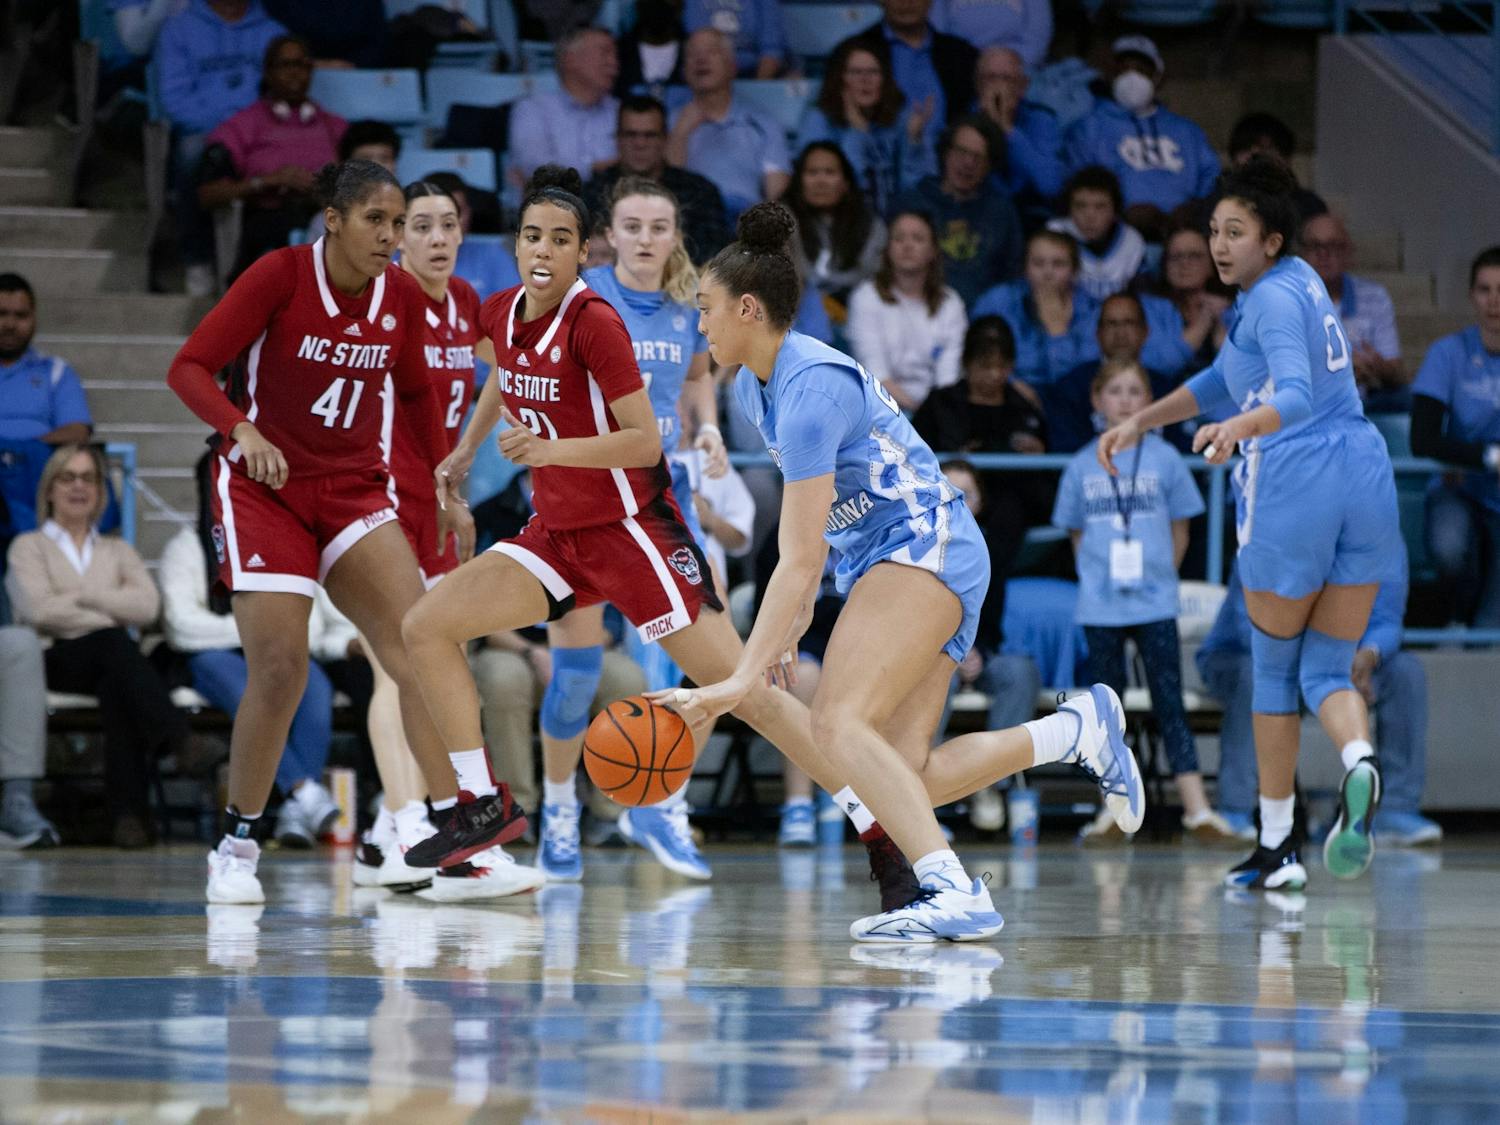 UNC sophomore guard /forward Destiny Adams (20) dribbling the ball during the women's basketball game against the NC State Wolfpack in Carmichael Arena on Sunday, Jan. 15, 2023. The Tar Heels won 56-47.